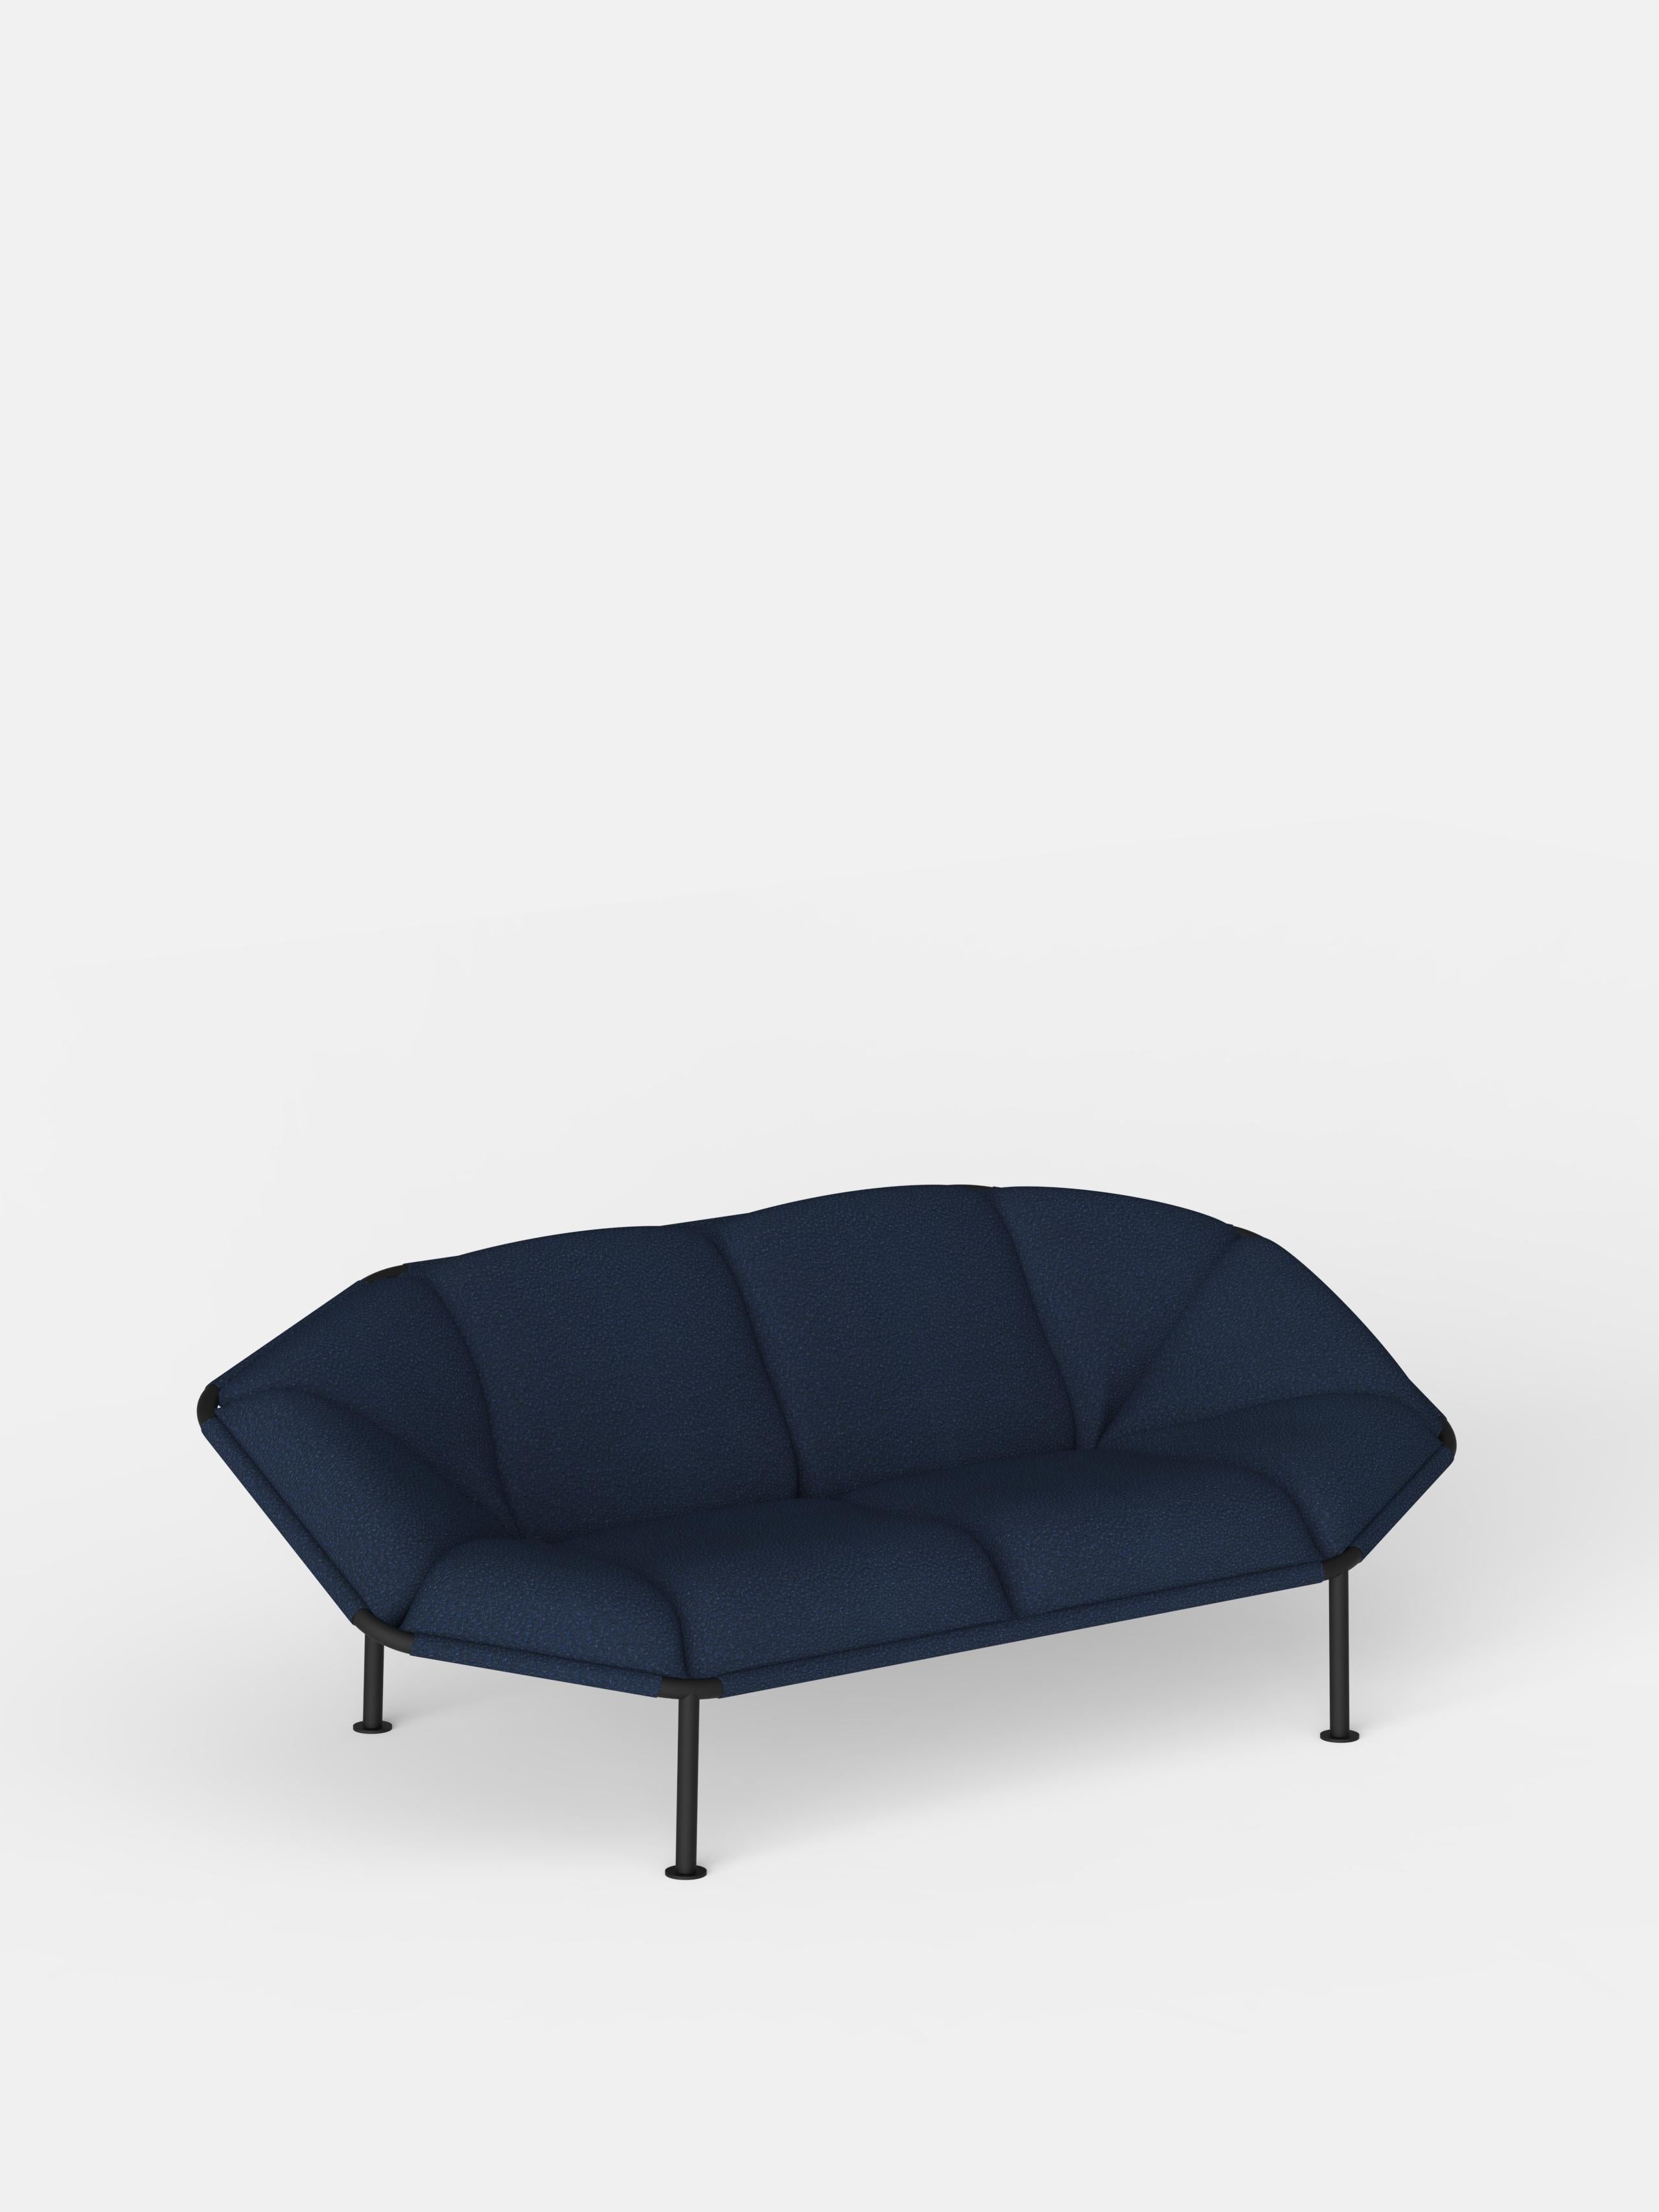 Navy Blue Atlas 2 Seater Sofa by Kann Design
Dimensions: D 94 x W 203 x H 78 cm.
Materials: Powder-coated steel, HR foam, fabric upholstery Kvadrat Sprinkles 794 (40% polyester filling, 30% wool, 20% polyester, 10% nylon).
Available in other